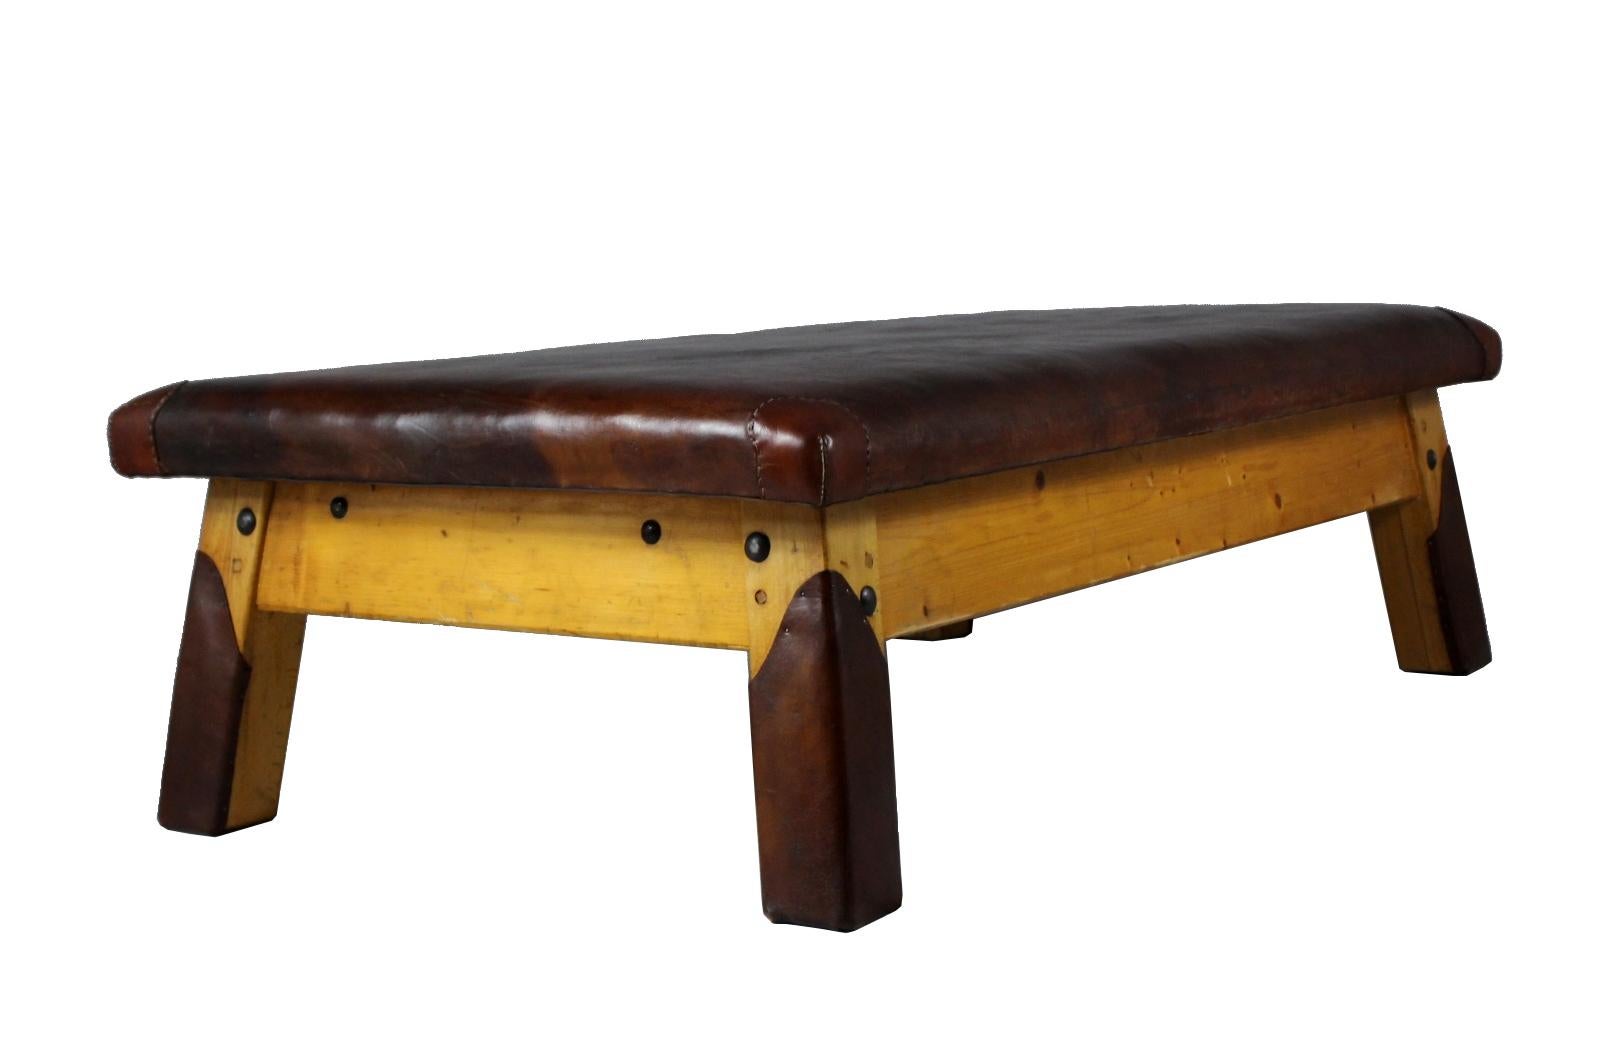 Large leather gym table/ daybed/ bench from the 1930s. The top is made from thick leather with nice patina, wooden legs. Very good condition.